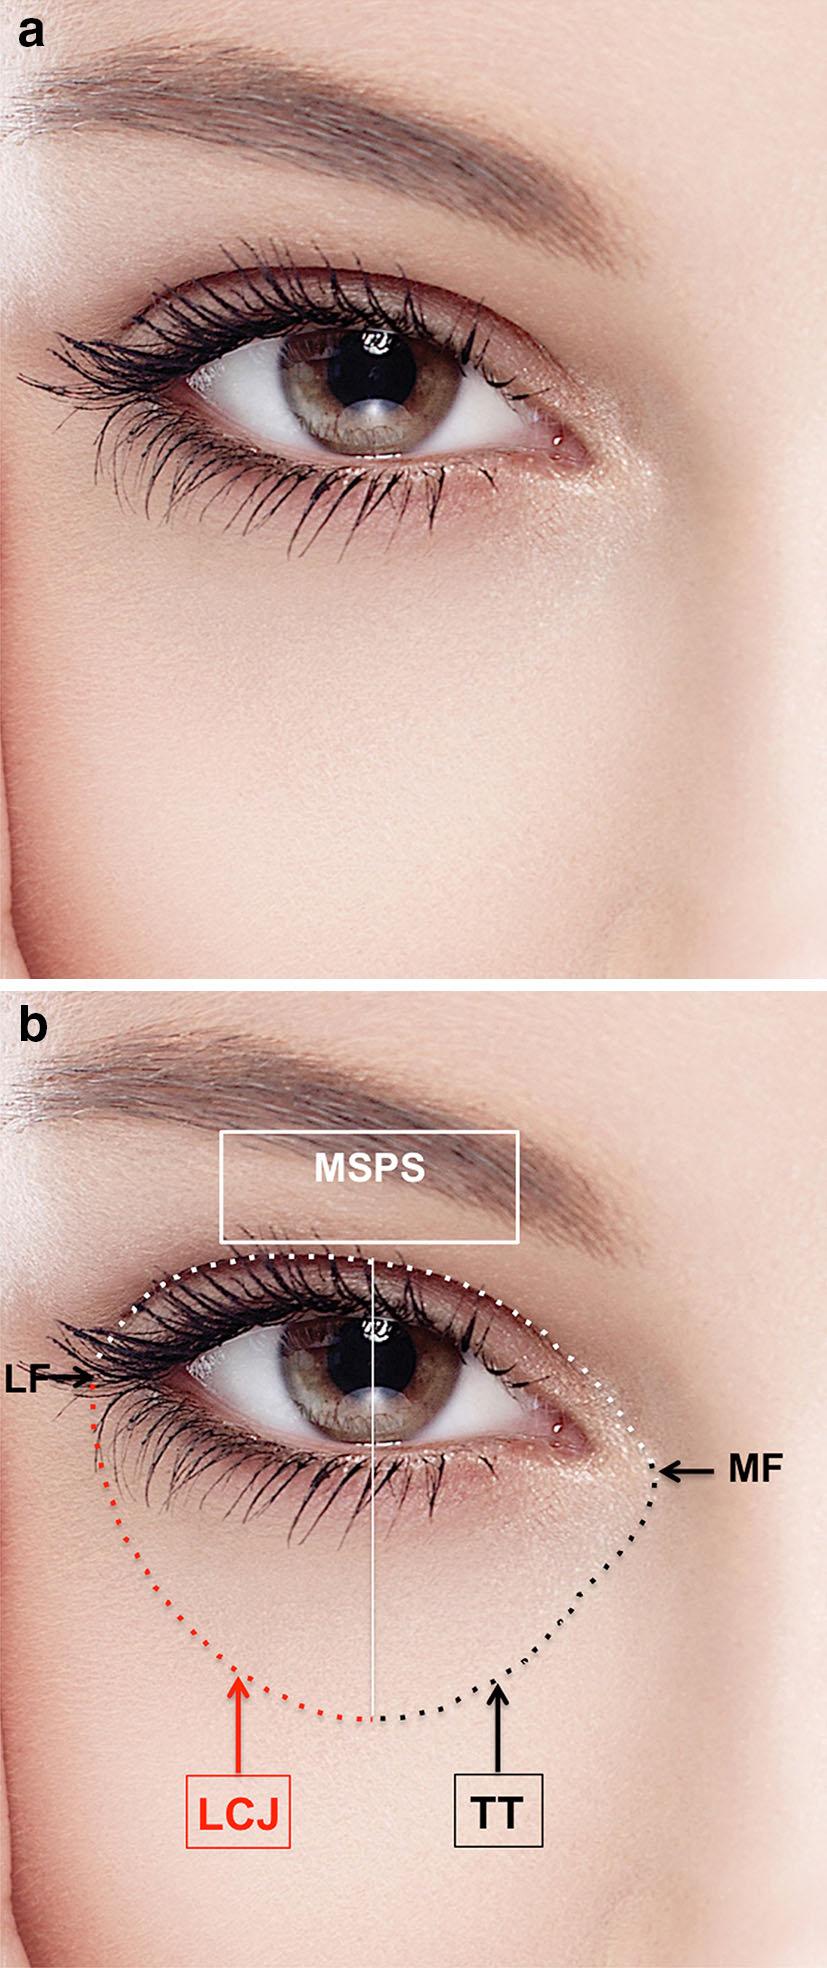 b Fig. 1 a Photograph of the peri-ocular area of a young attractive female model. The eye fissure presents a jaguar-like lateral upward slanting. The sclera presents a snow- white color.